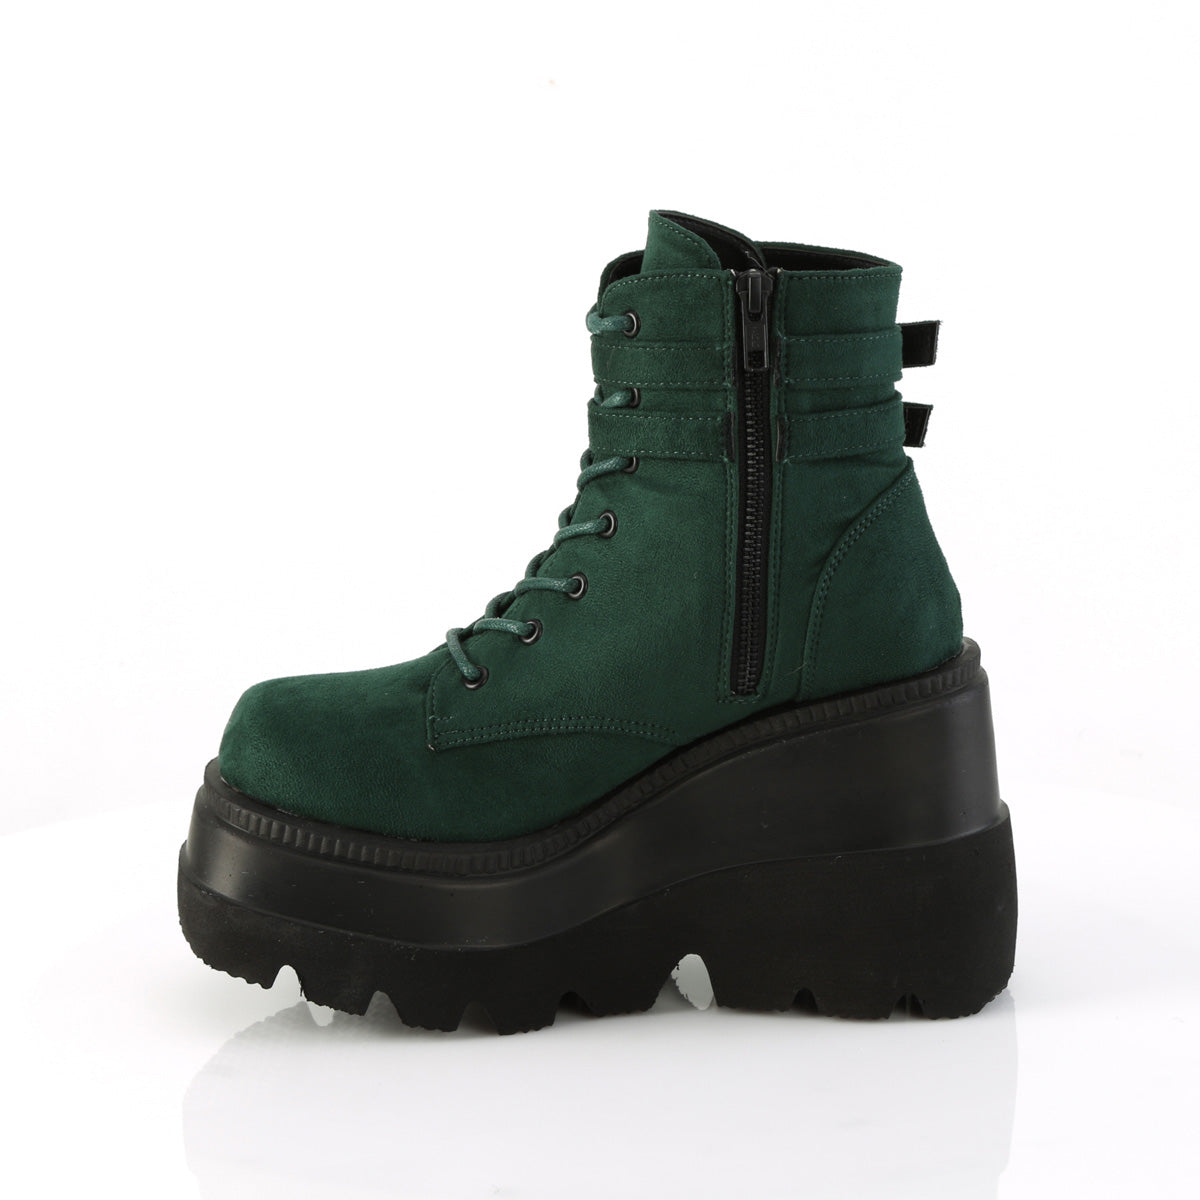 SHAKER-52 Emerald Suede Ankle Boots